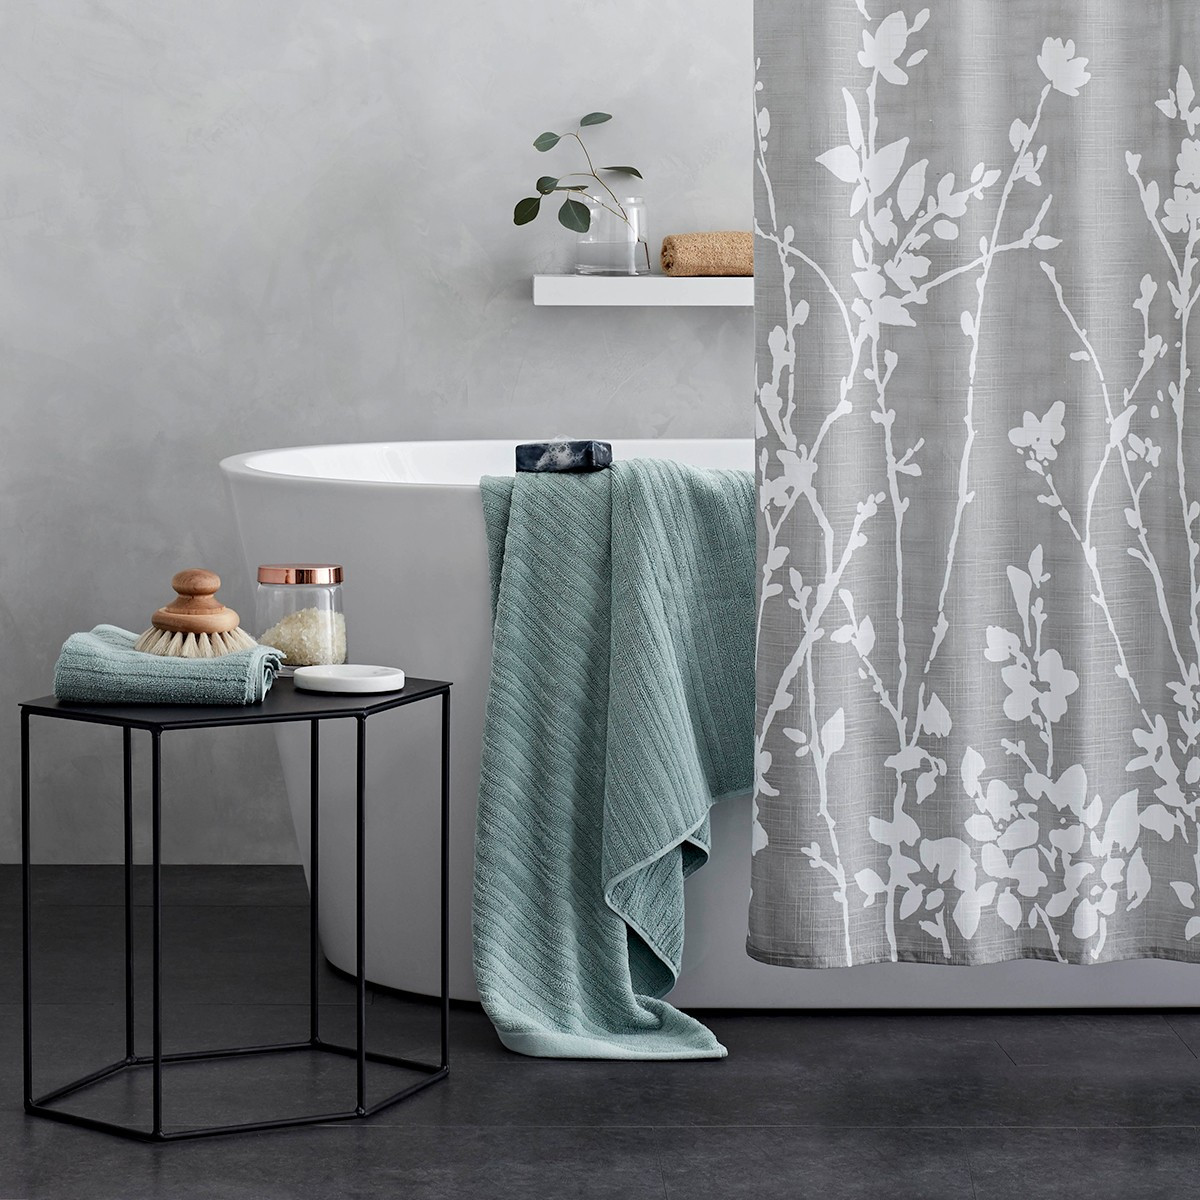 Target Bathroom Decor
 Tar Debuts New Project 62 Furniture and Home Decor And